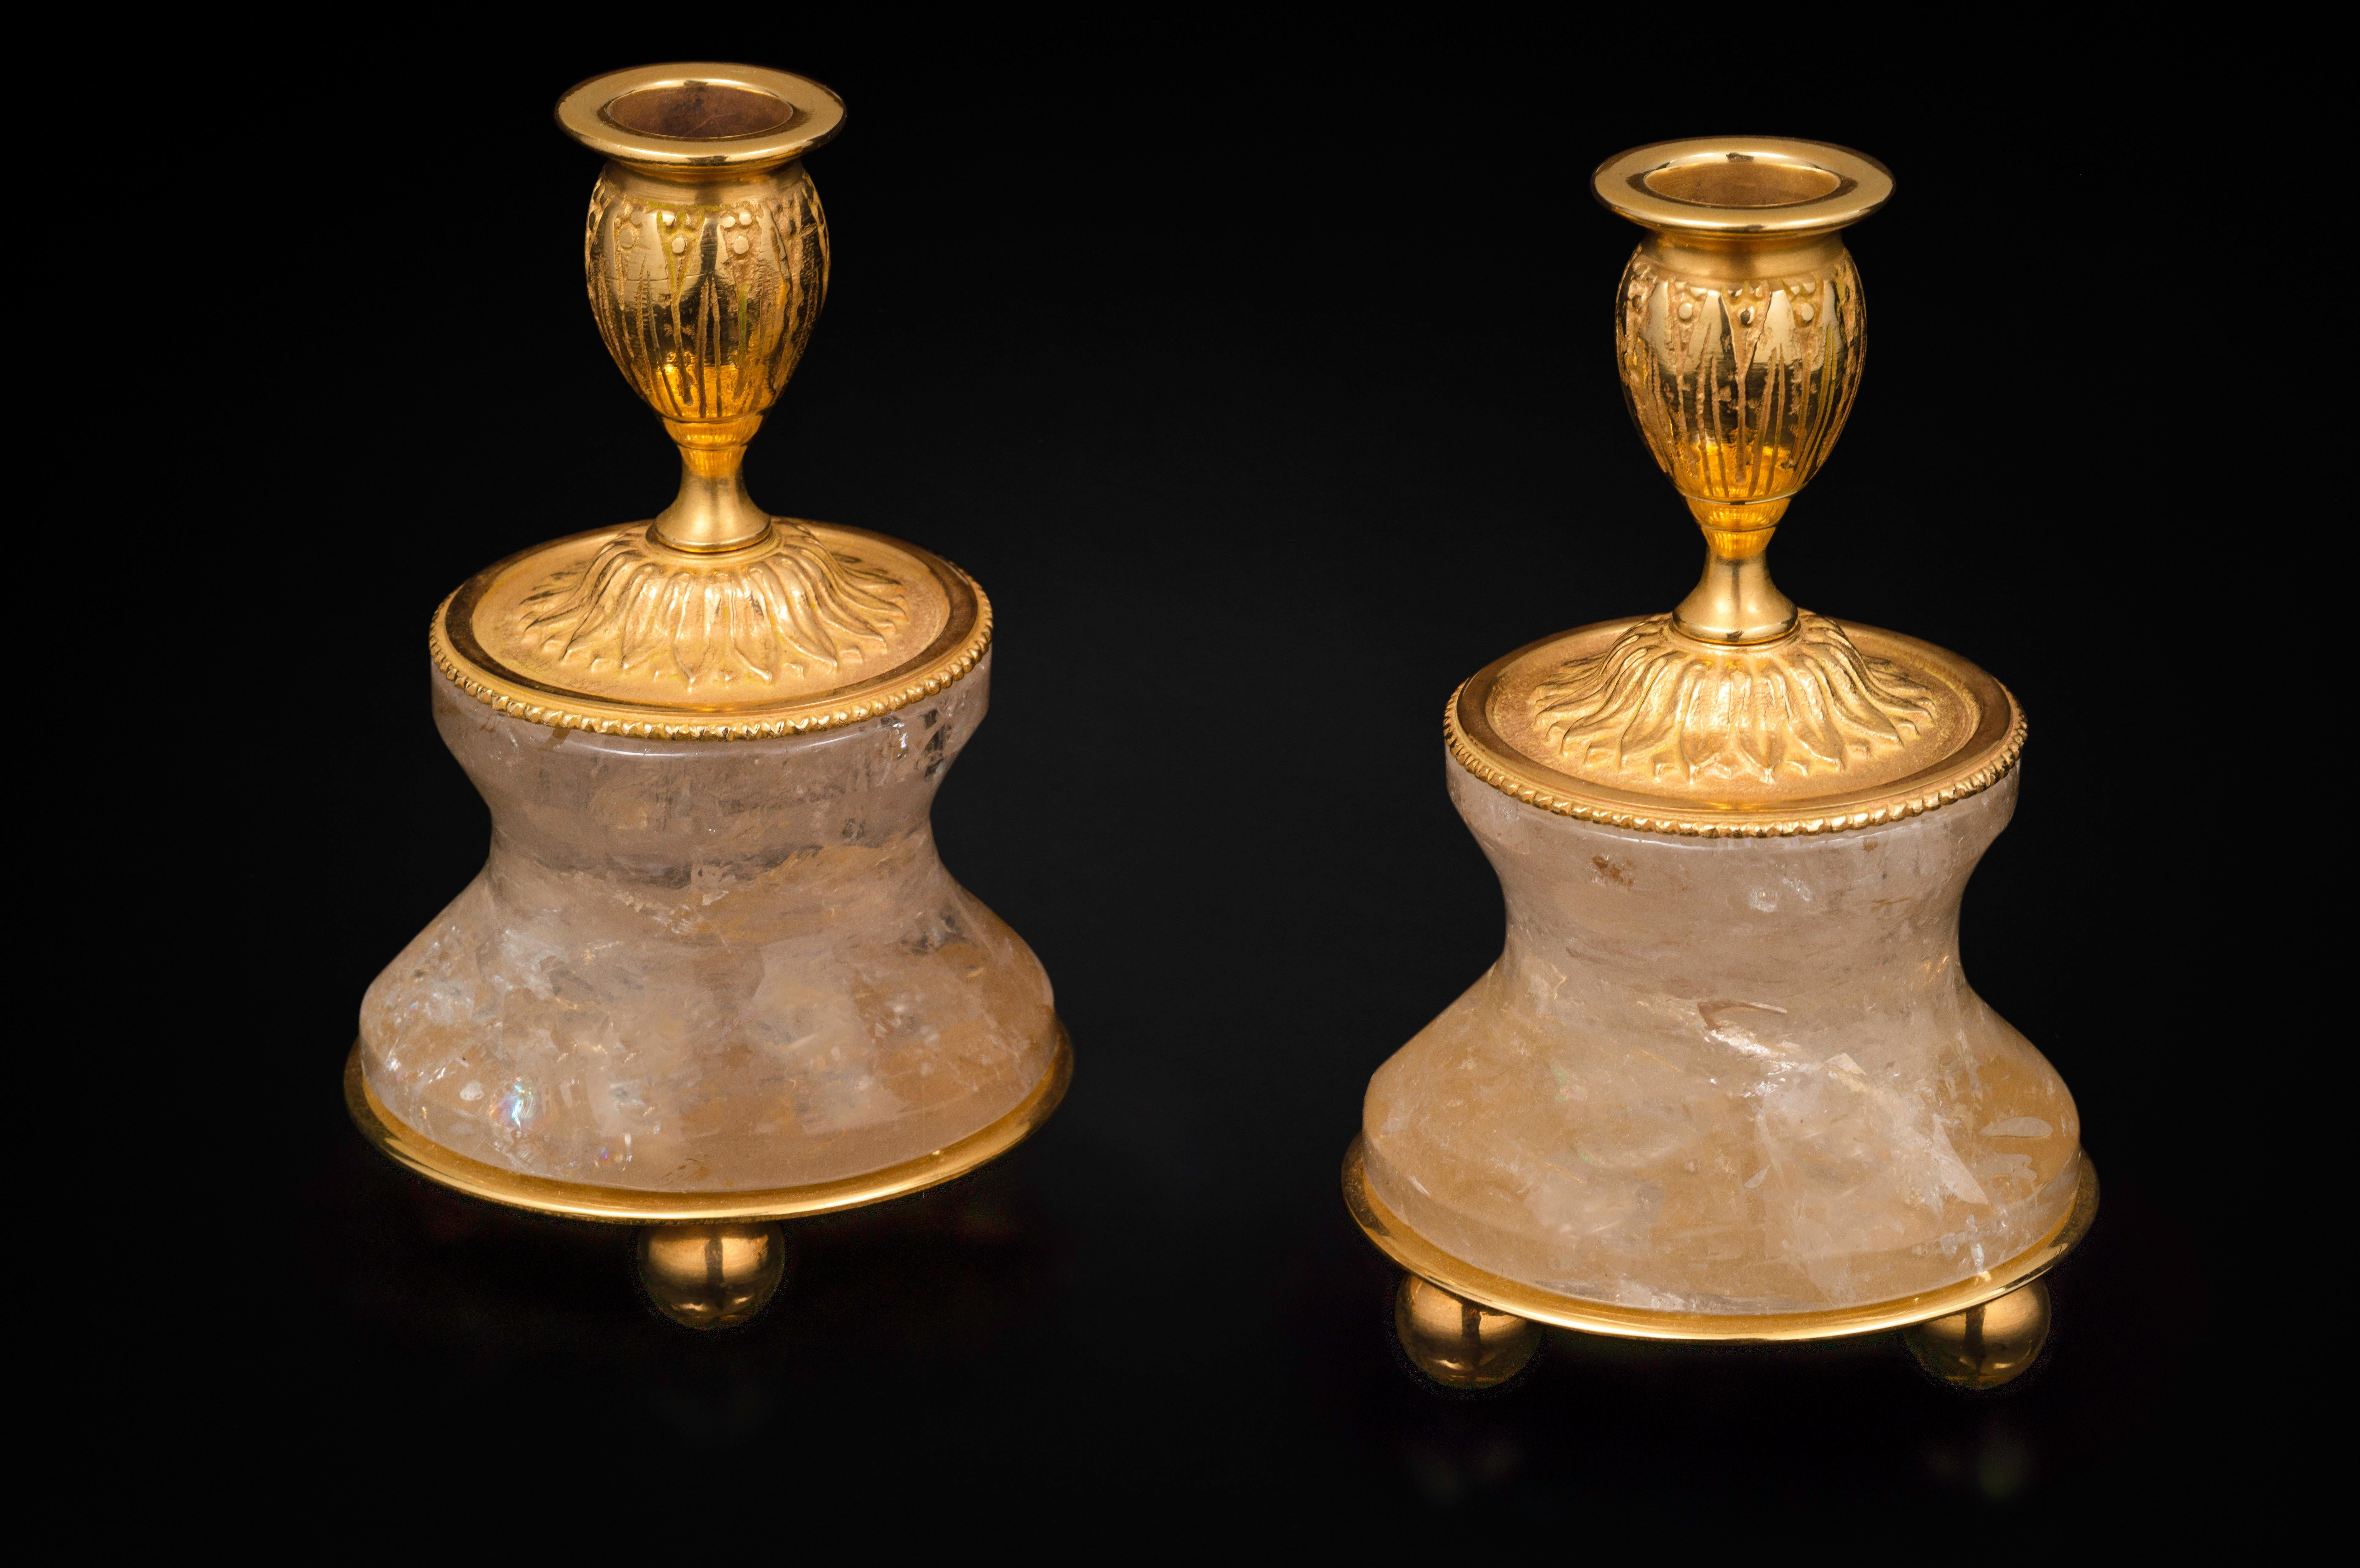 Very chic pair of rock crystal pair of lamps or candlesticks in the typic style of Louis the XVI th .
So you can used as you want, depend of your interiors and mood.
The base is carved in a single piece of rock crystal stone.
The top is made in